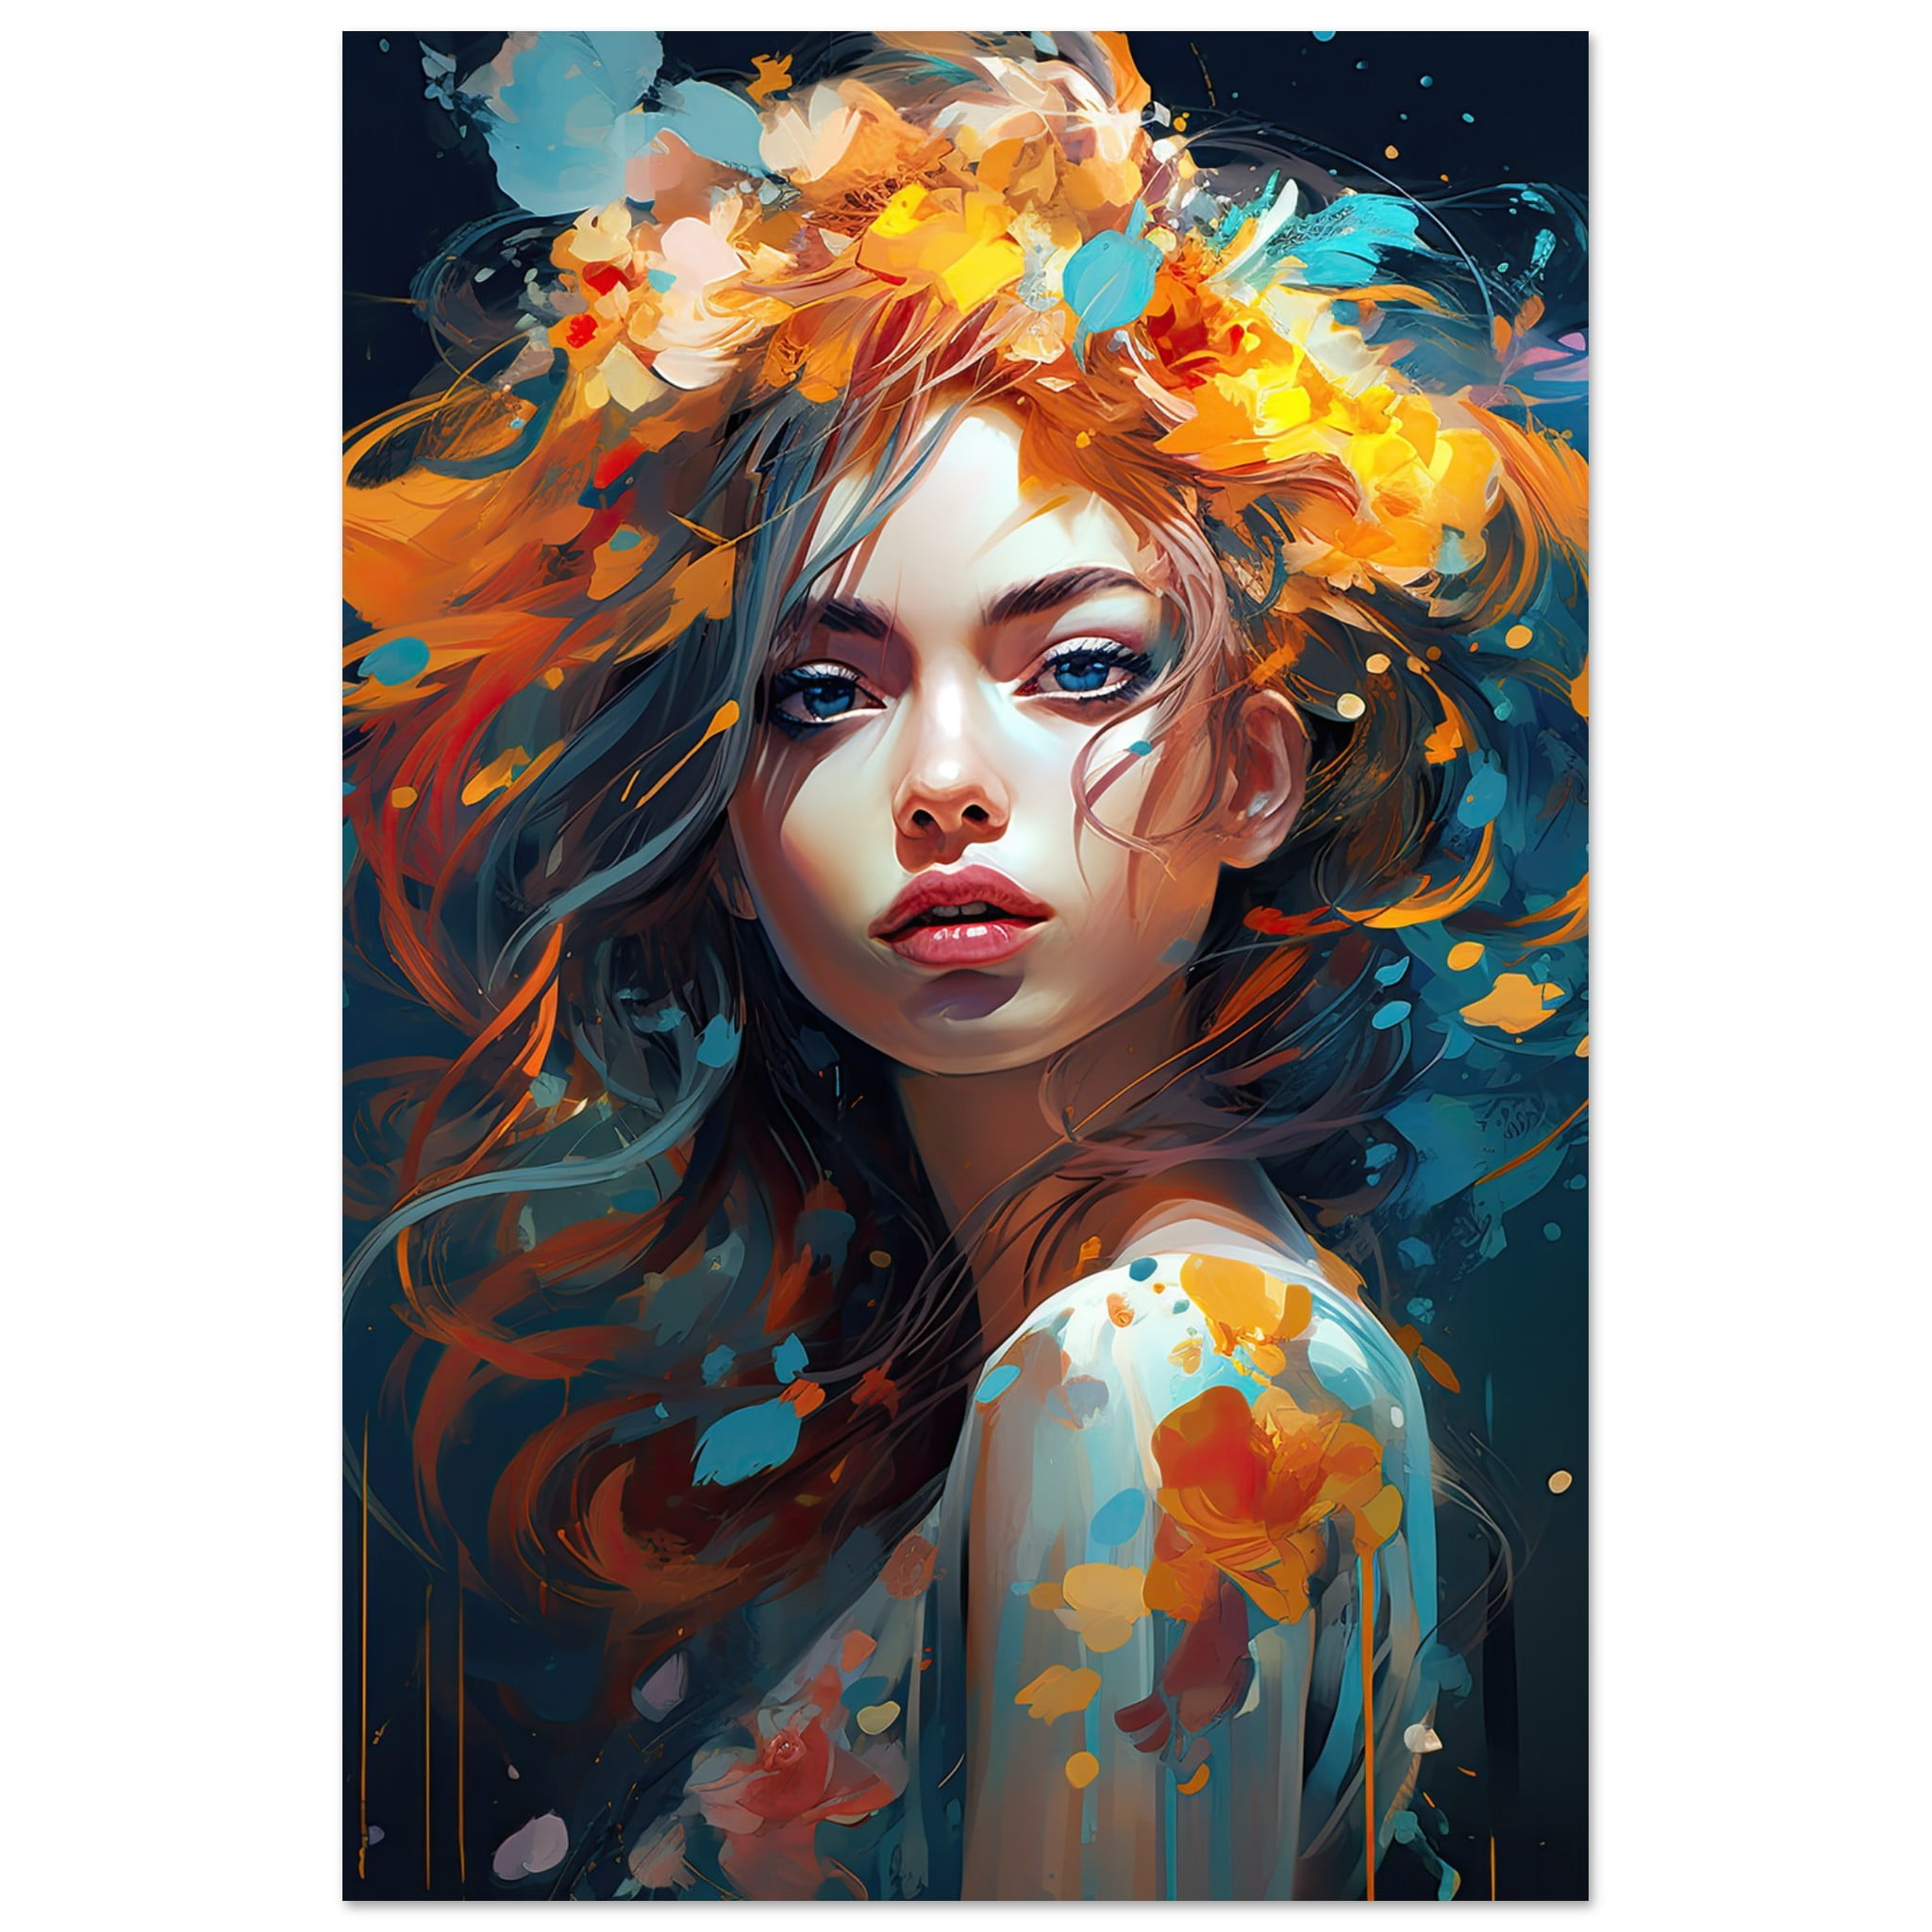 Girl Painted in Color Art Poster - 40x60 cm / 16x24″